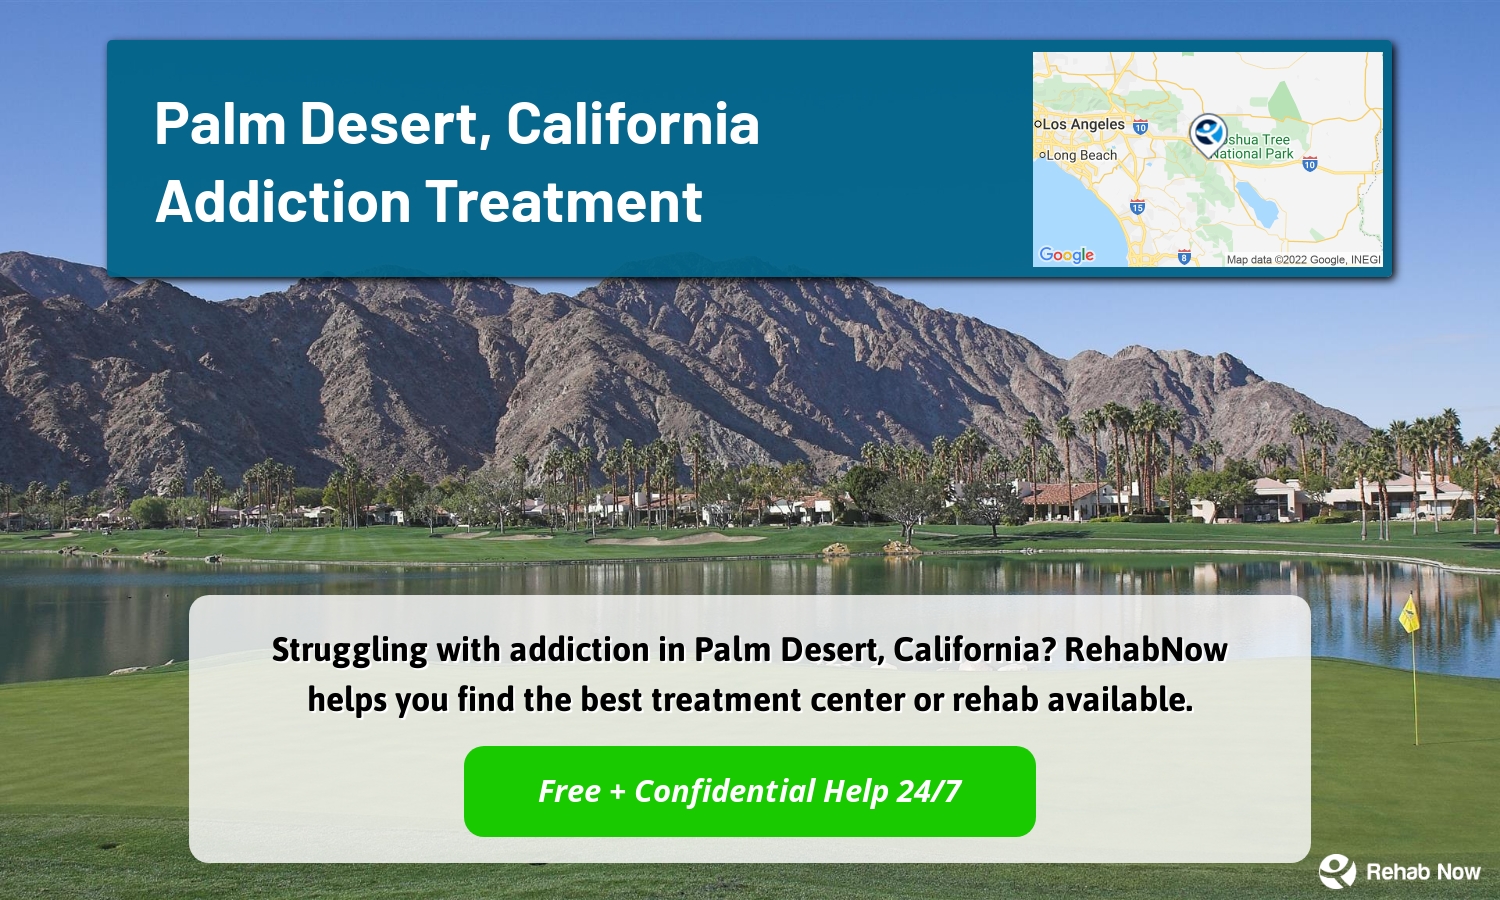 Struggling with addiction in Palm Desert, California? RehabNow helps you find the best treatment center or rehab available.